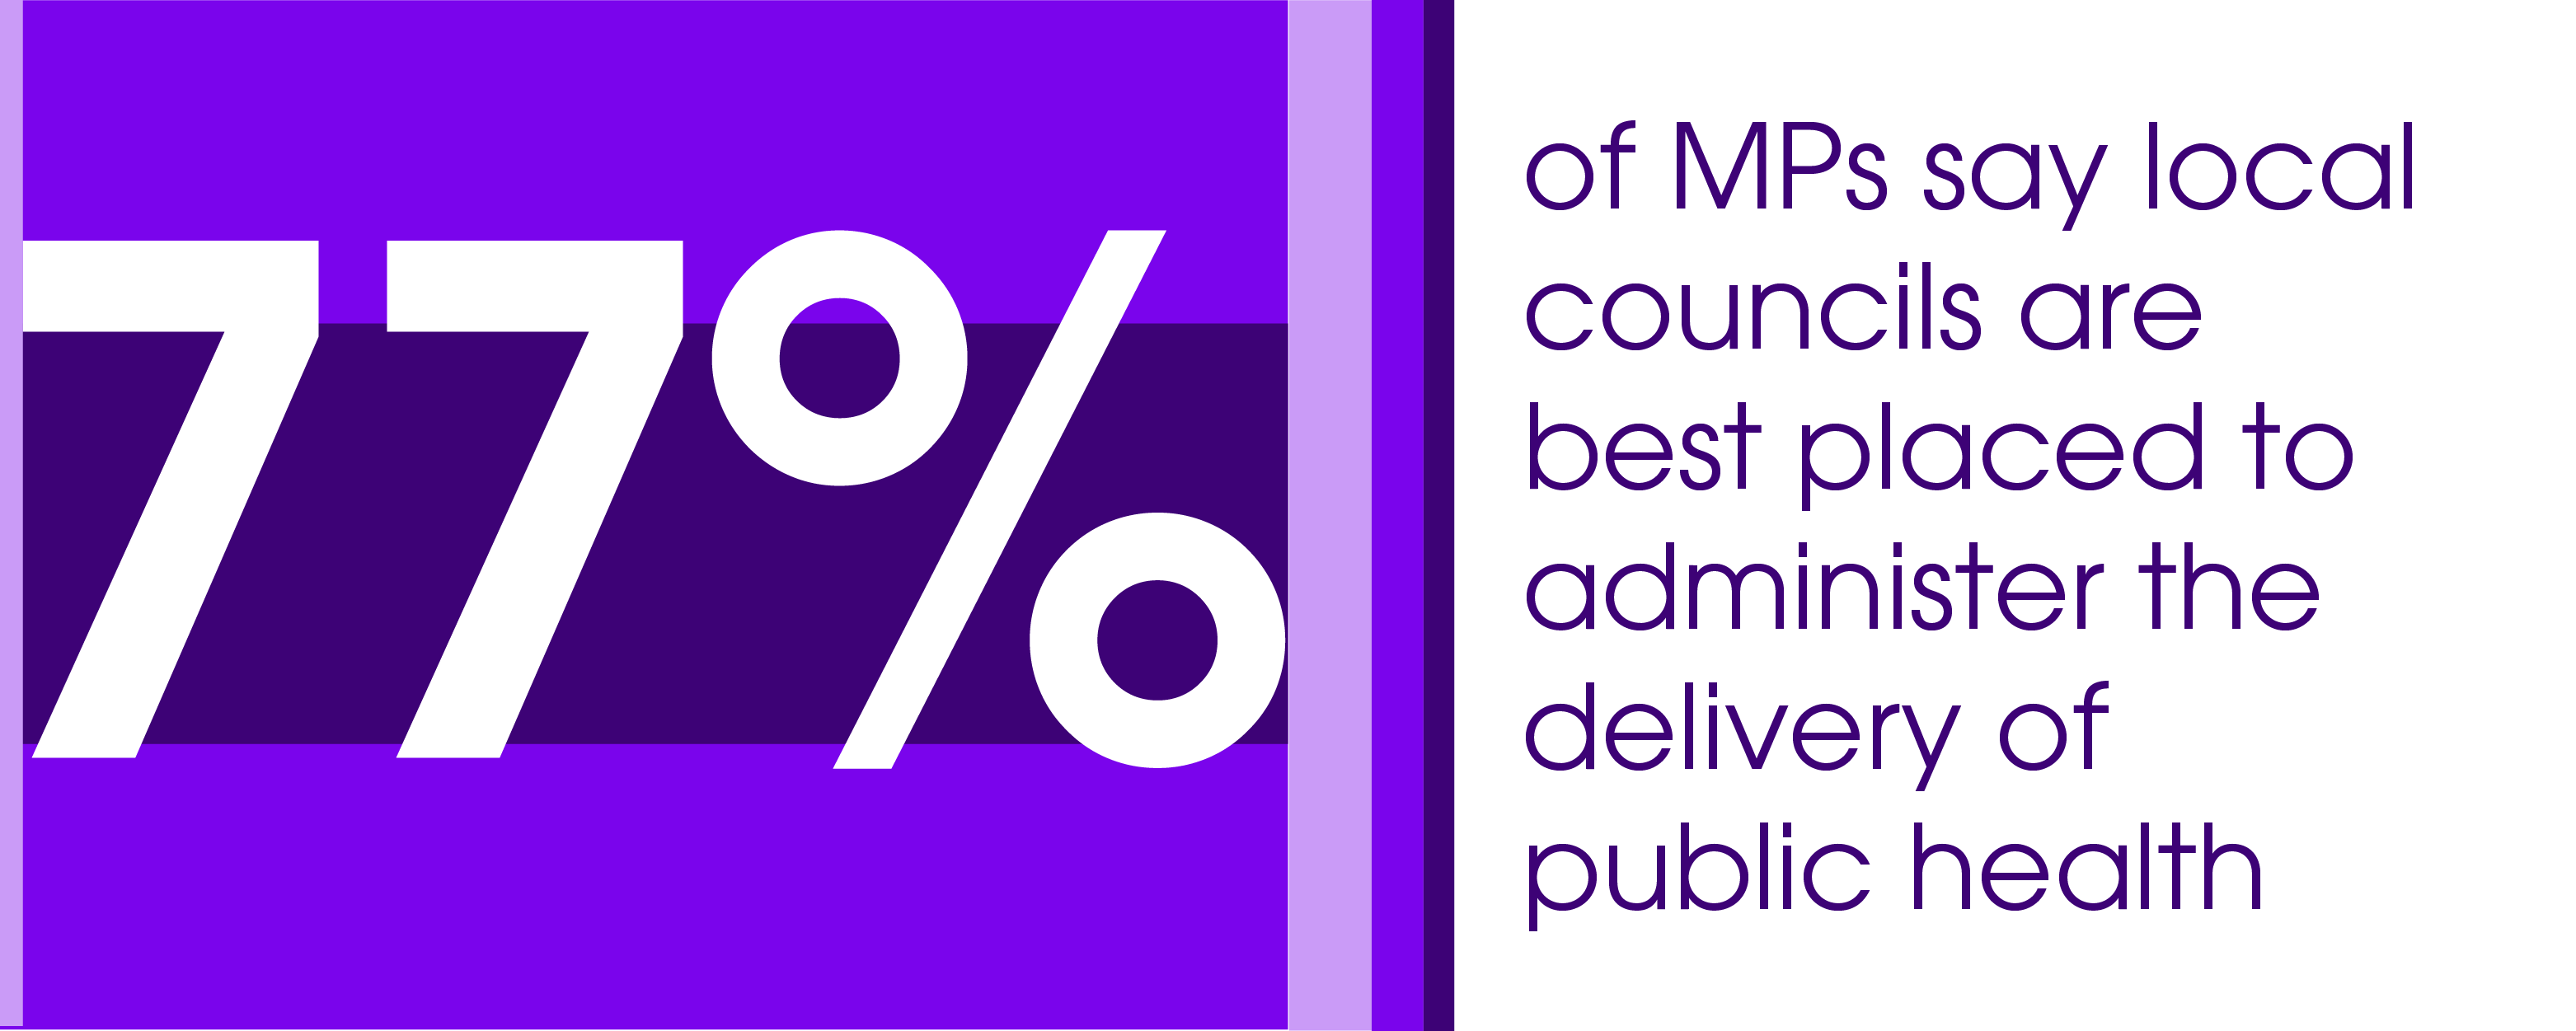 77% of MPs say local councils are best placed to administer the delivery of public health